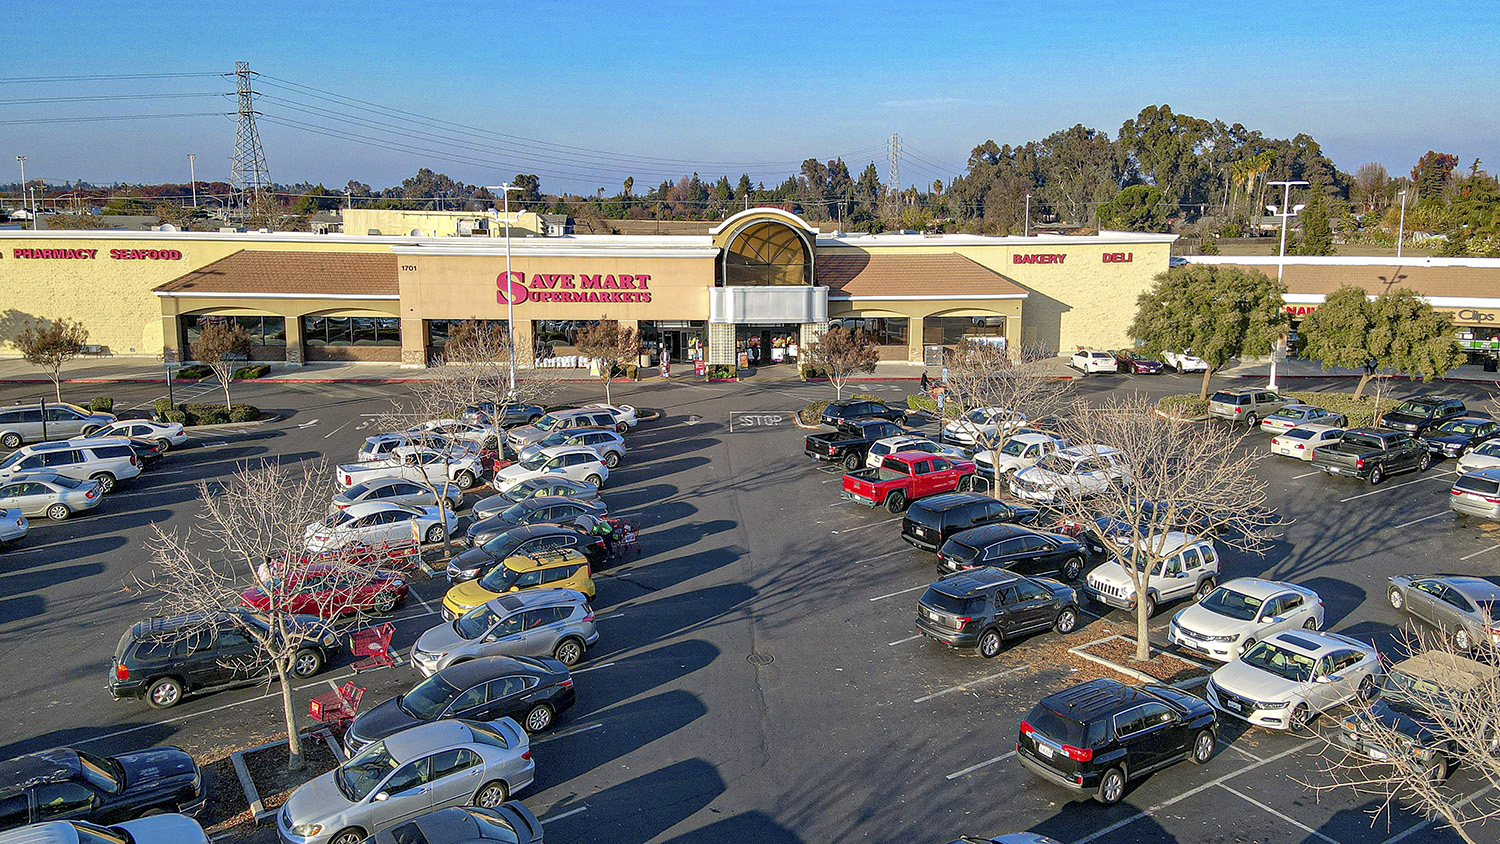 Hanley Investment Group Represents Phillips Edison & Company in Sale of Grocery-Anchored Shopping Center in Central California